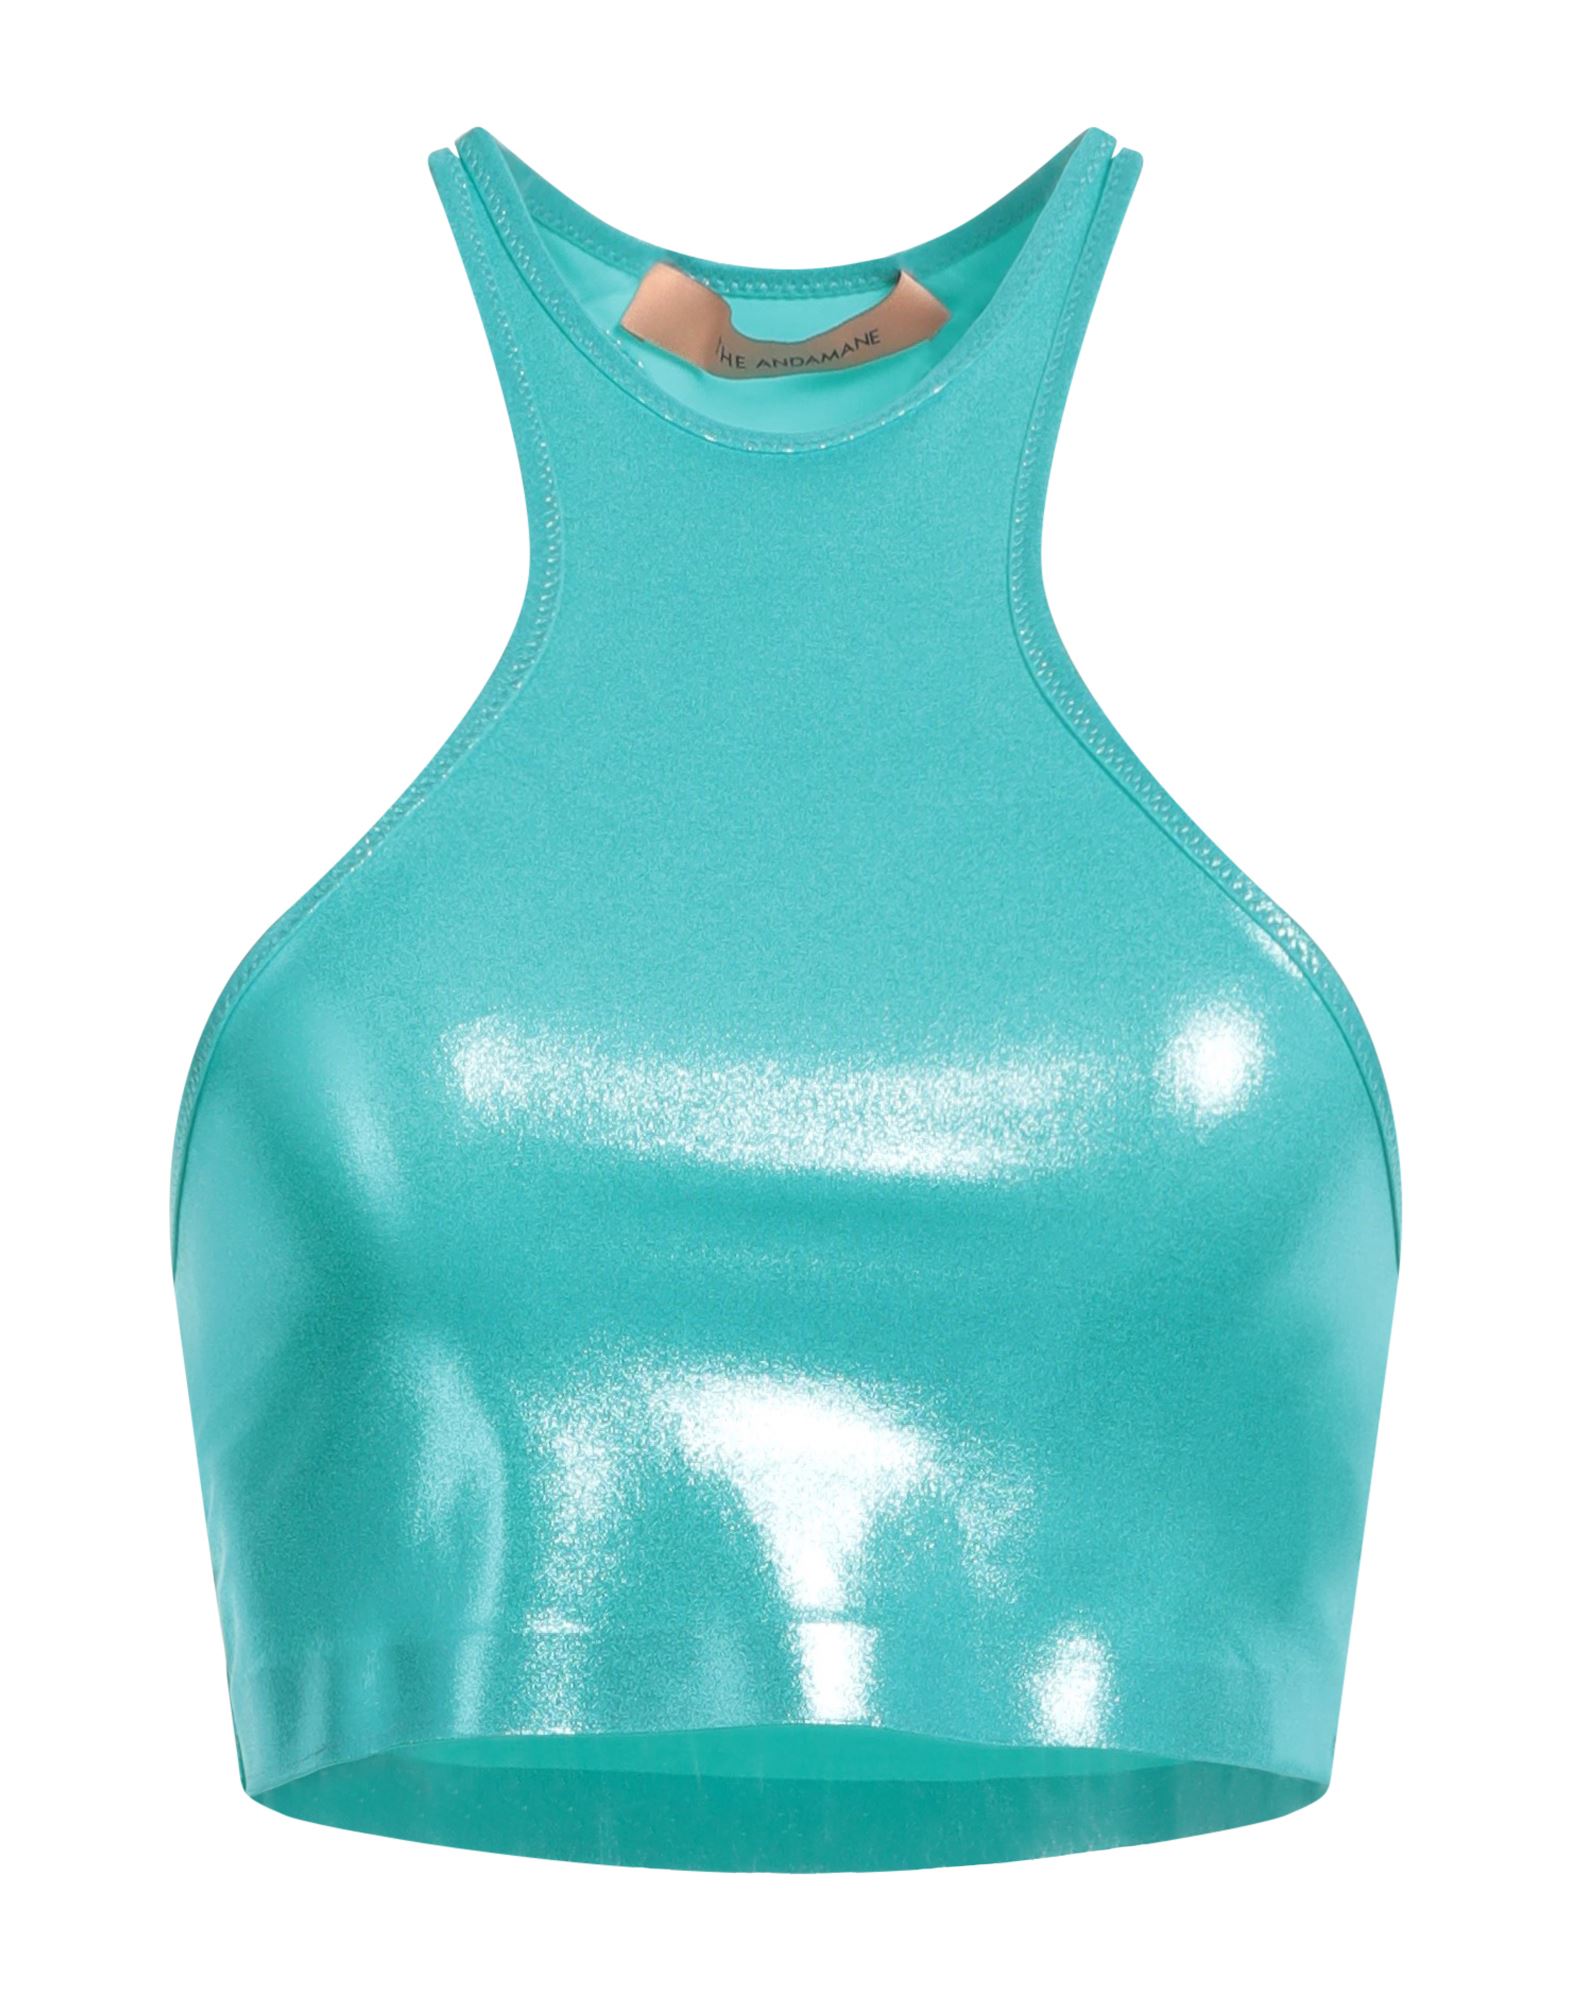 The Andamane Tops In Turquoise